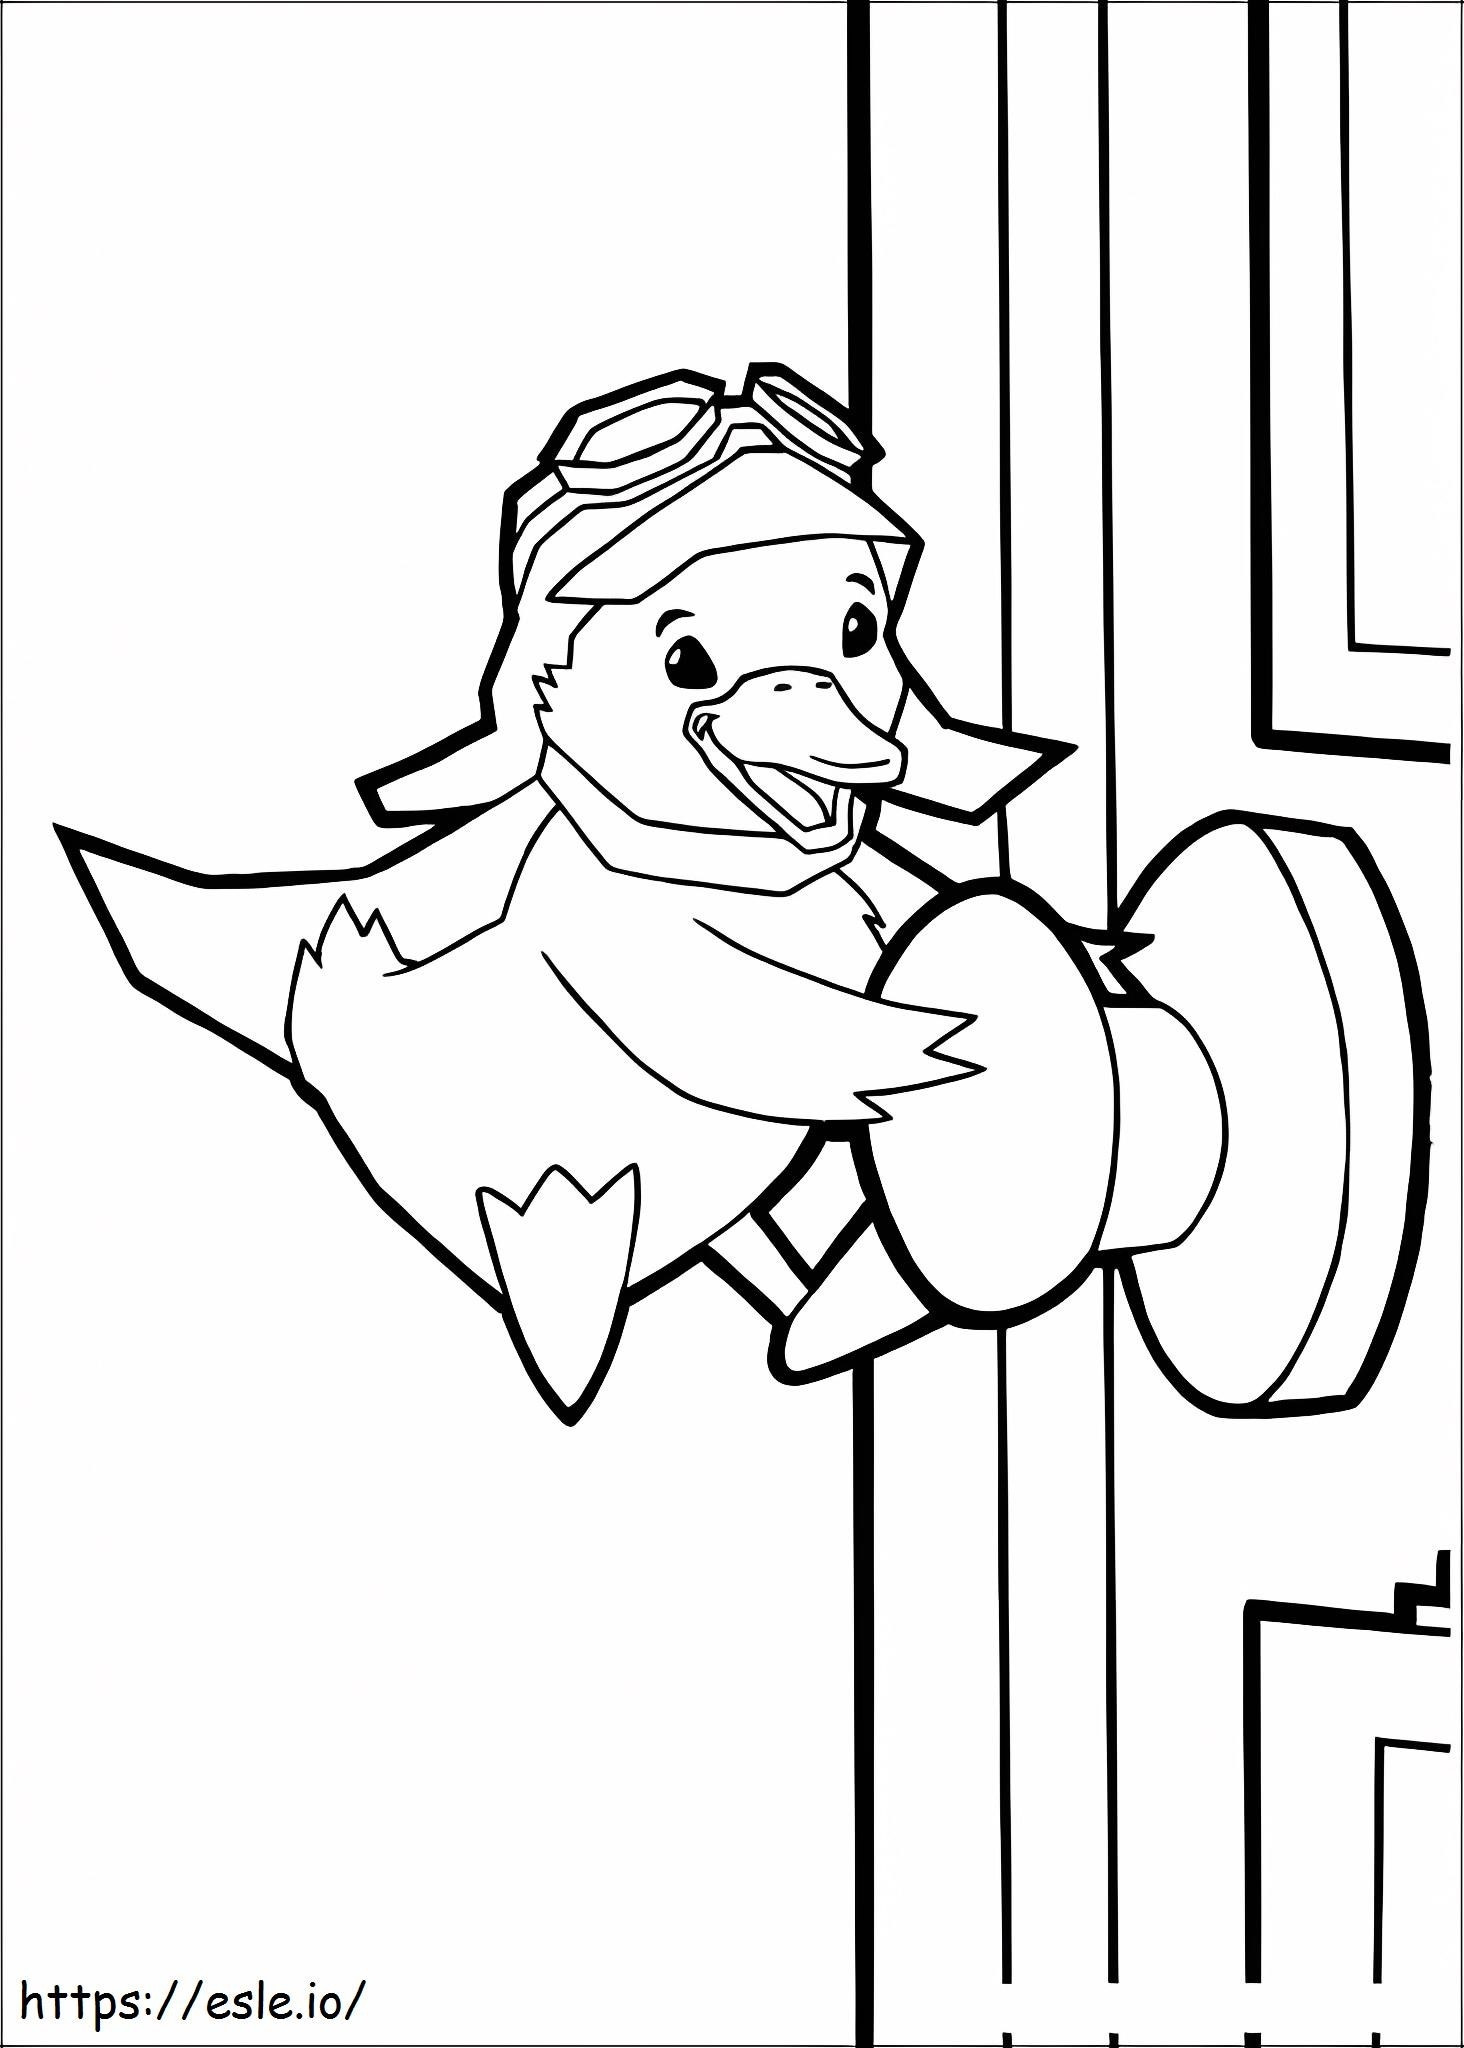 Funny Ming Ming Duckling coloring page